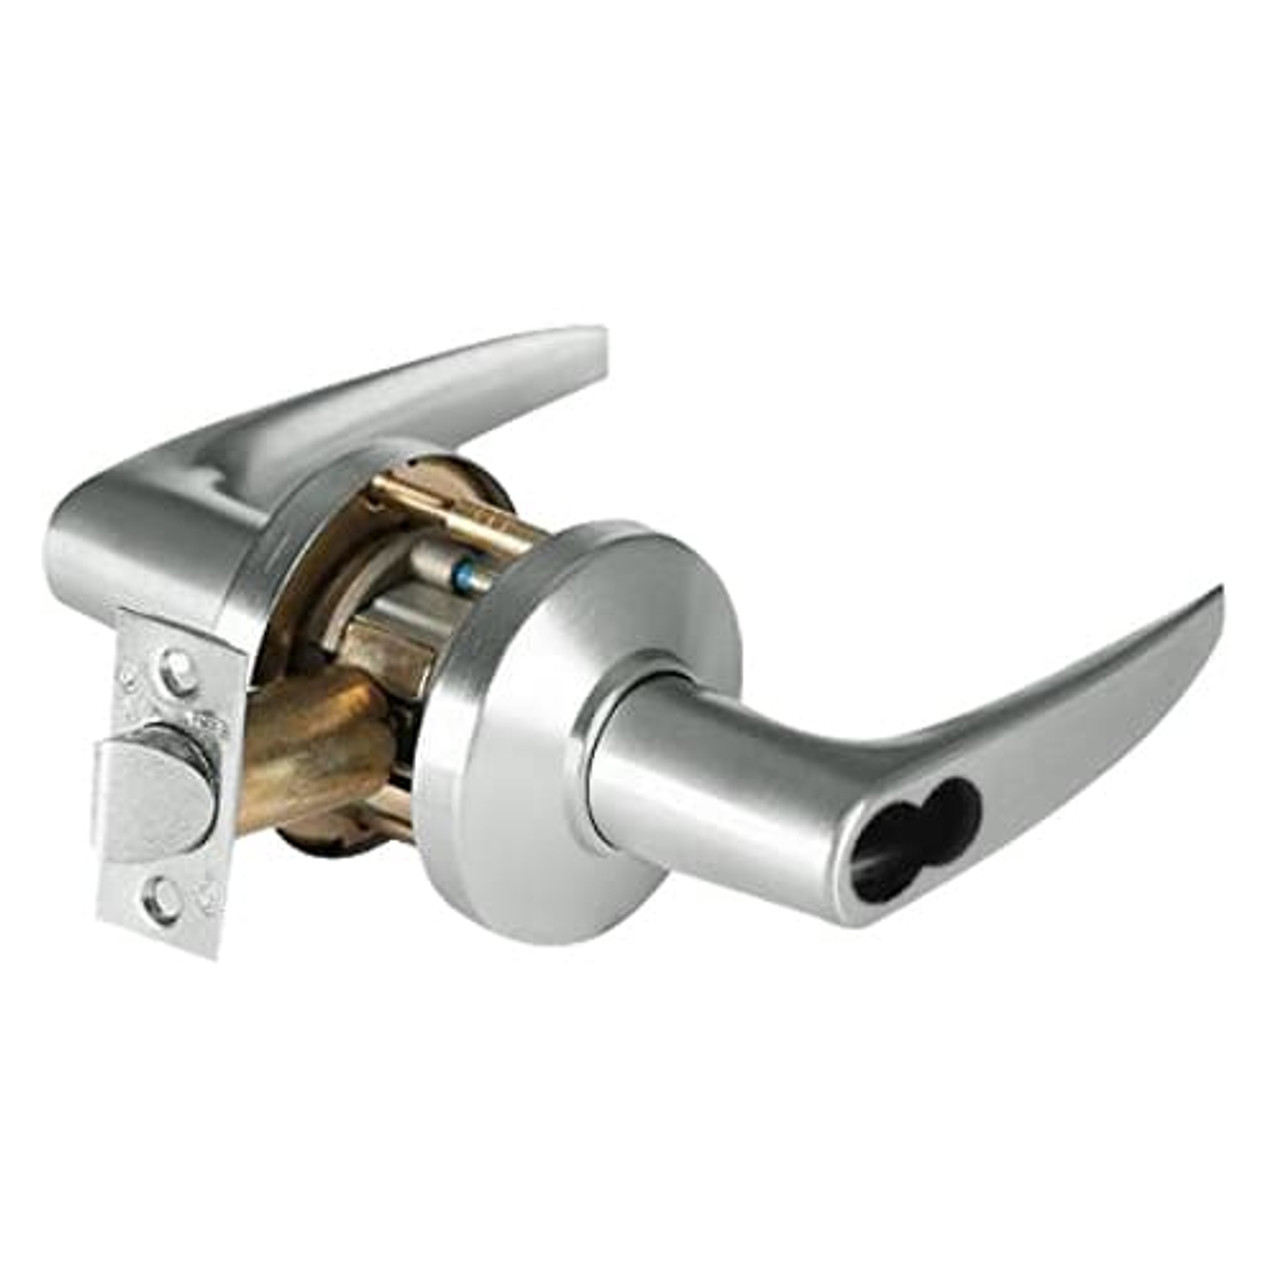 9K37W16CSTK618 Best 9K Series Institutional Cylindrical Lever Locks with Curved without Return Lever Design Accept 7 Pin Best Core in Bright Nickel